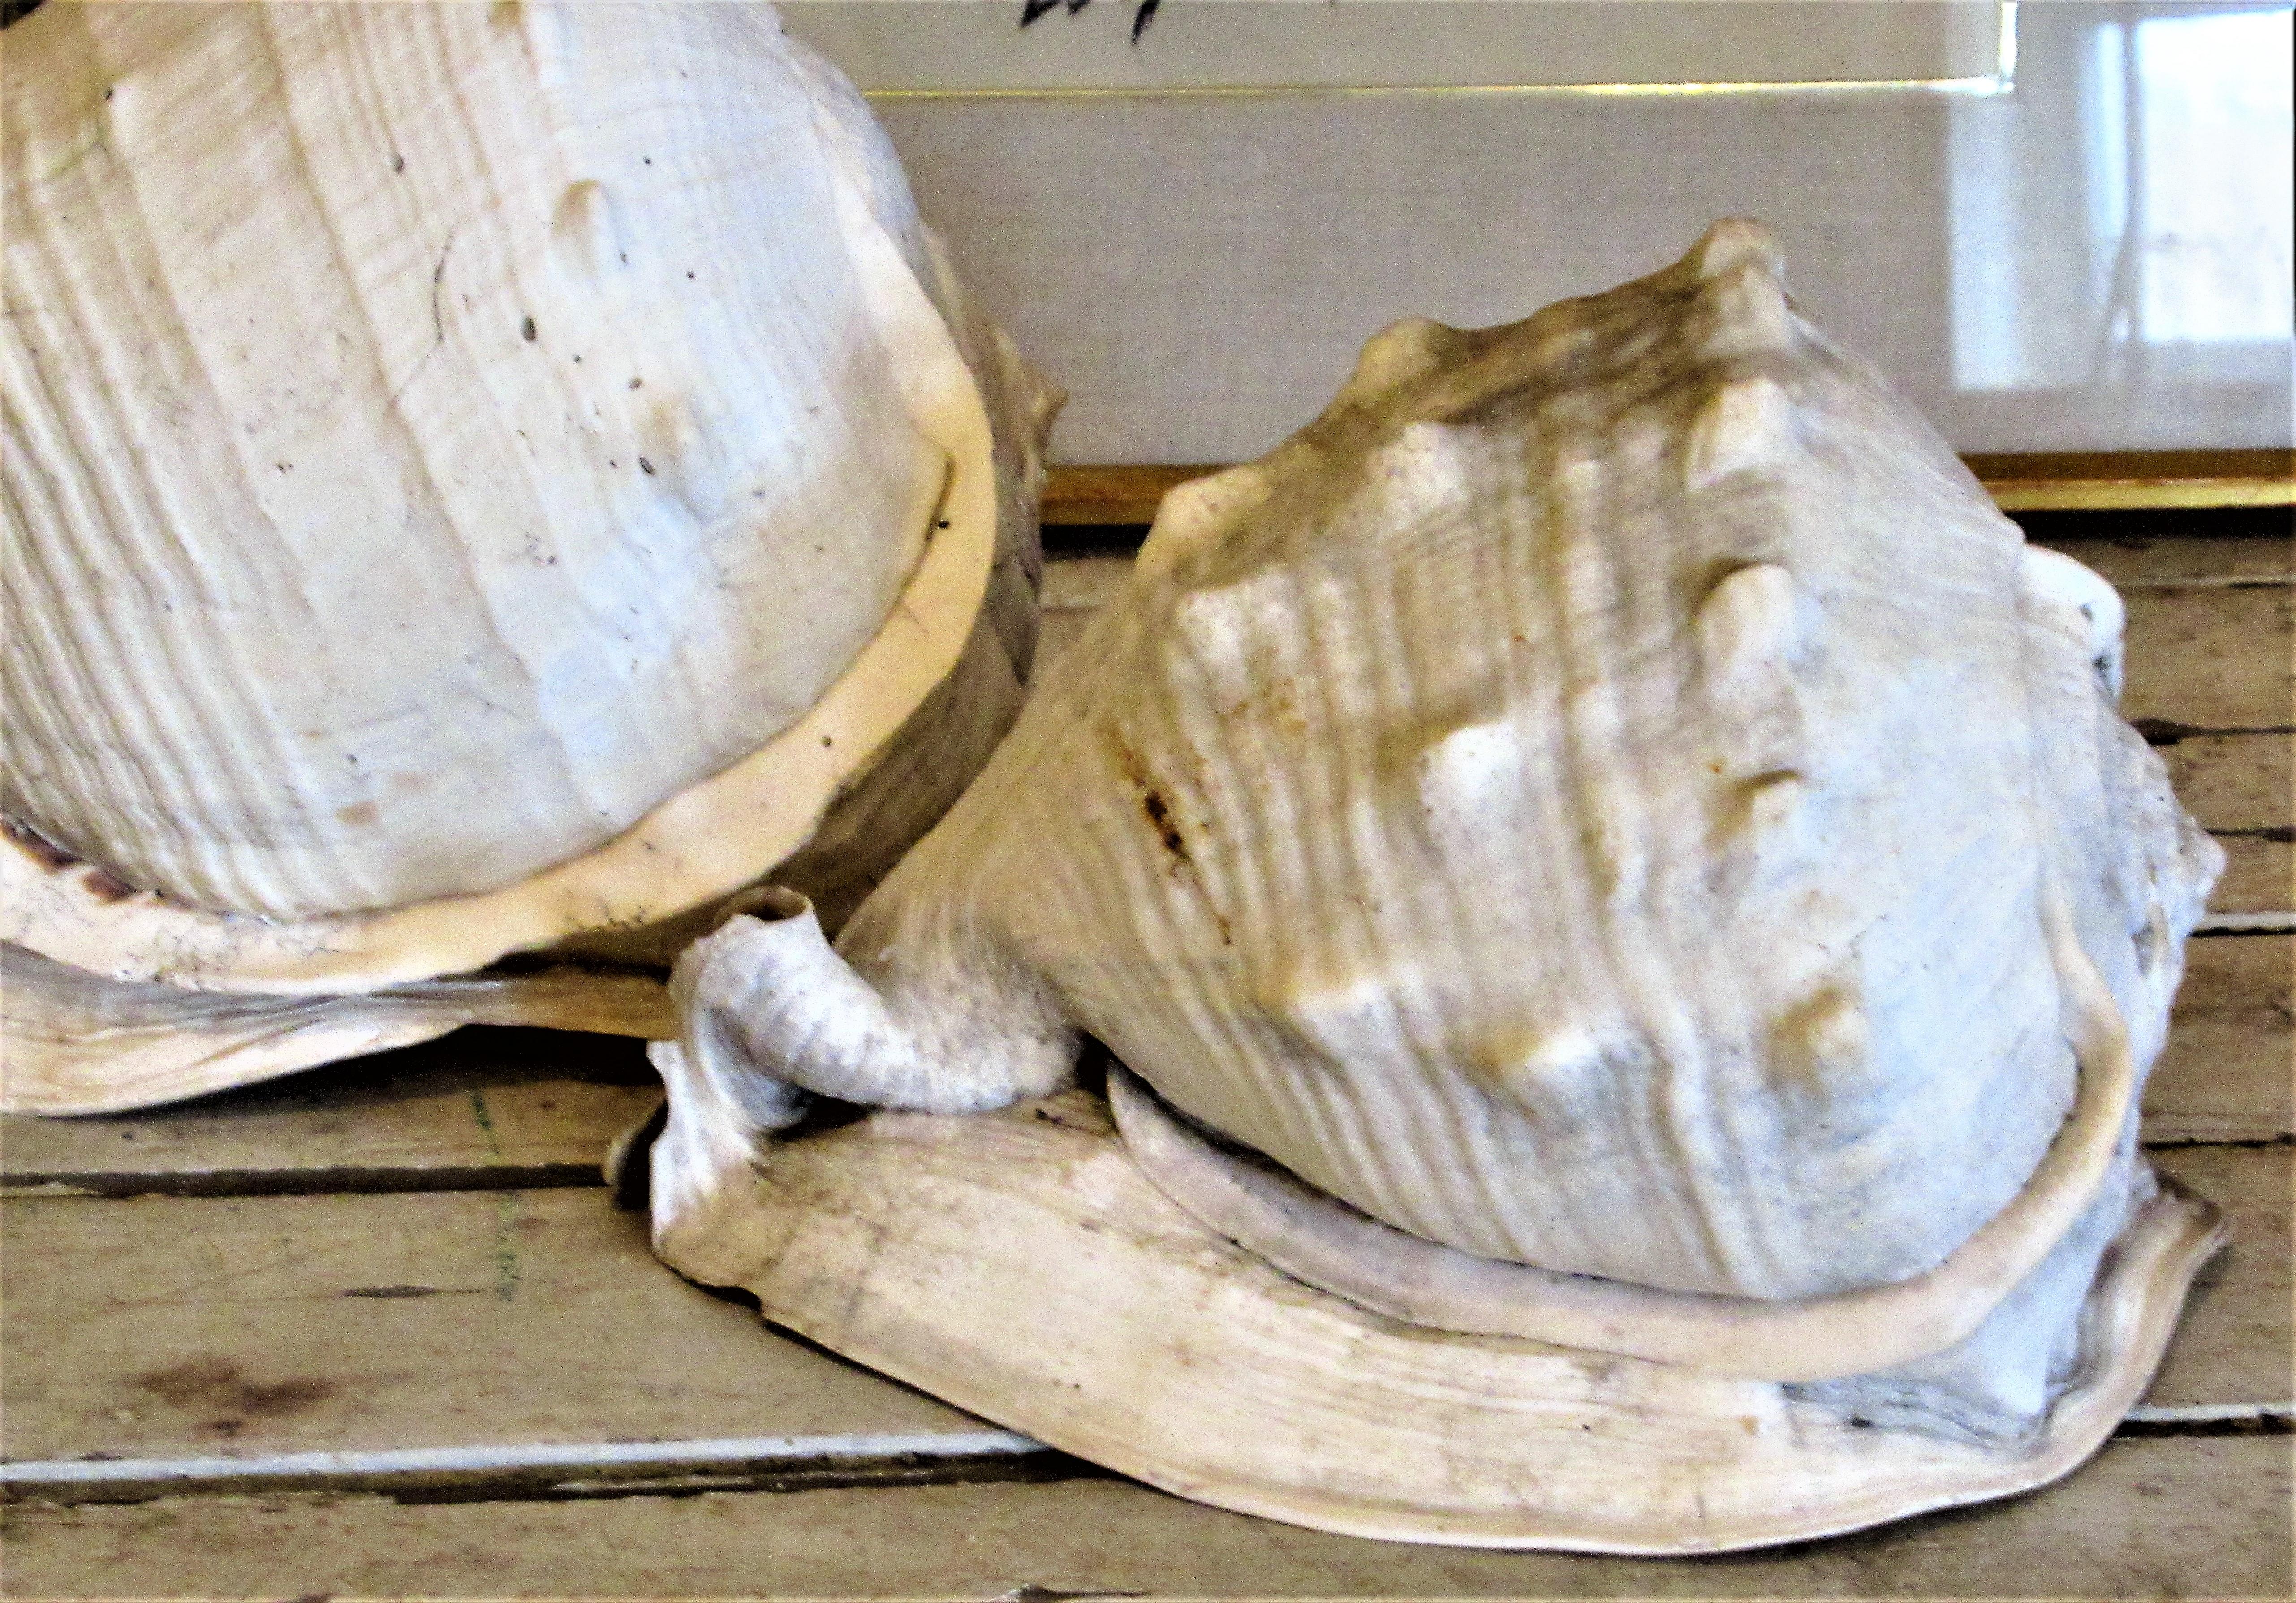  Old Queen Helmet Conch Shell Specimens 2